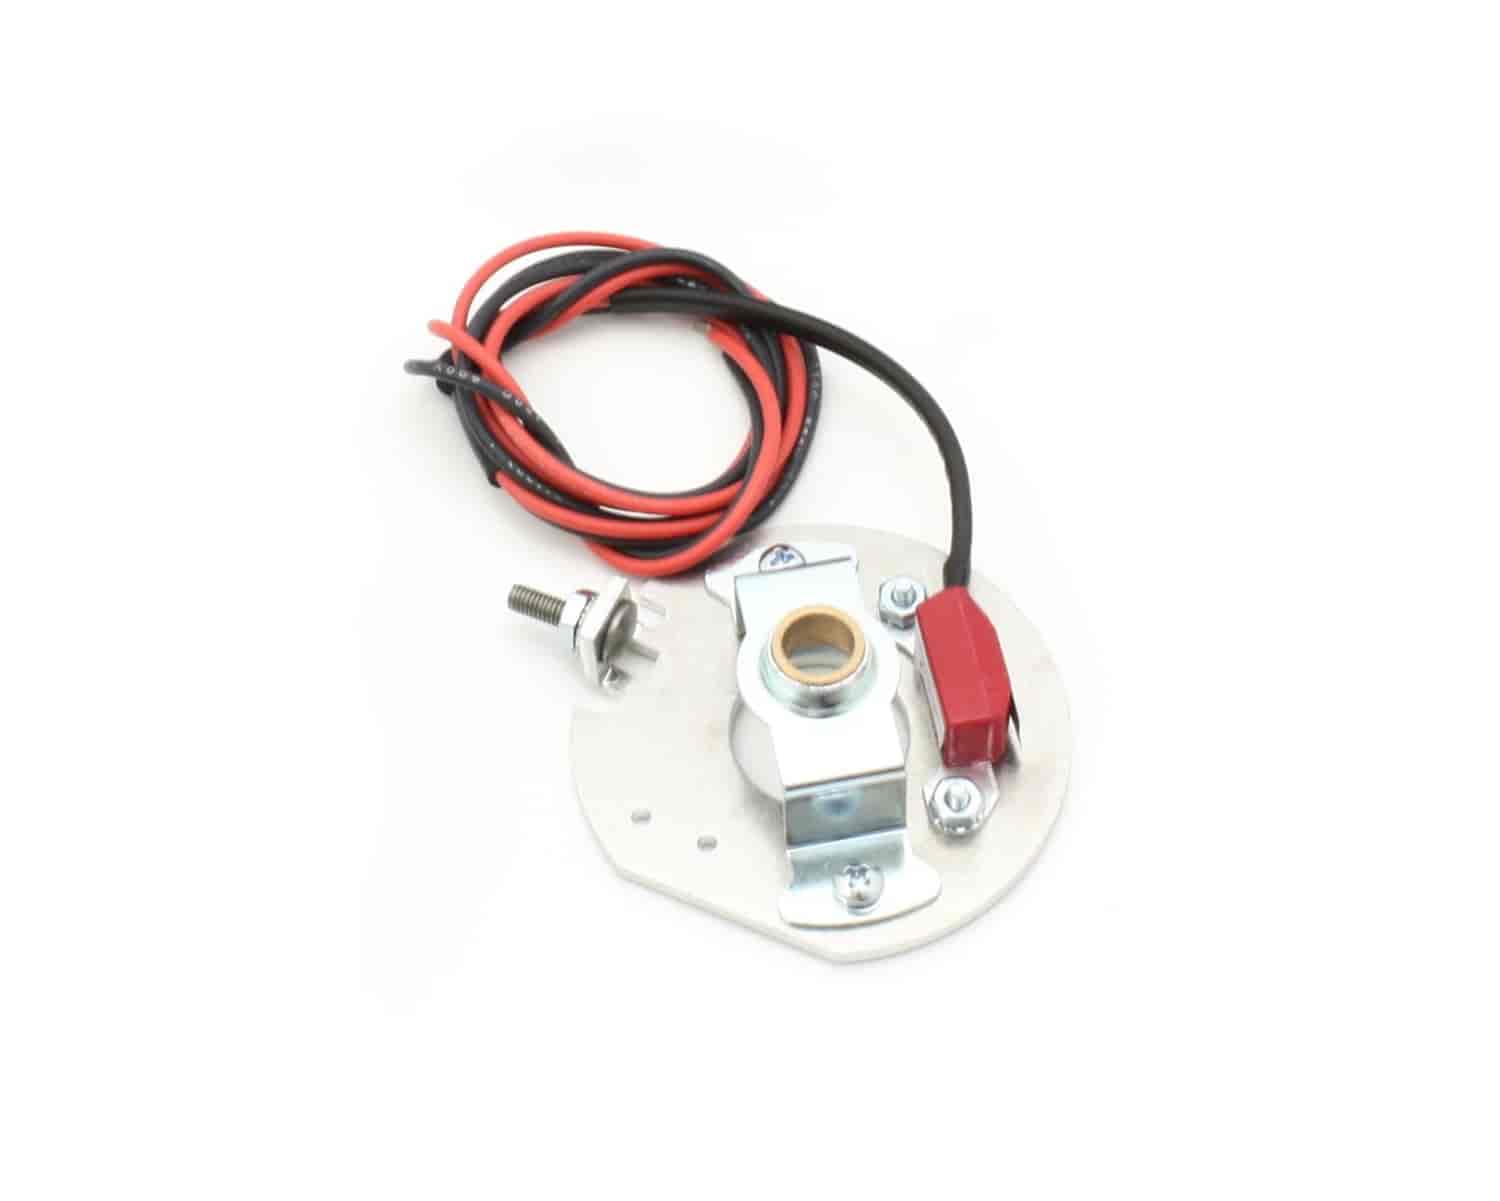 Module replacement for 91247XT Ignitor II Kit